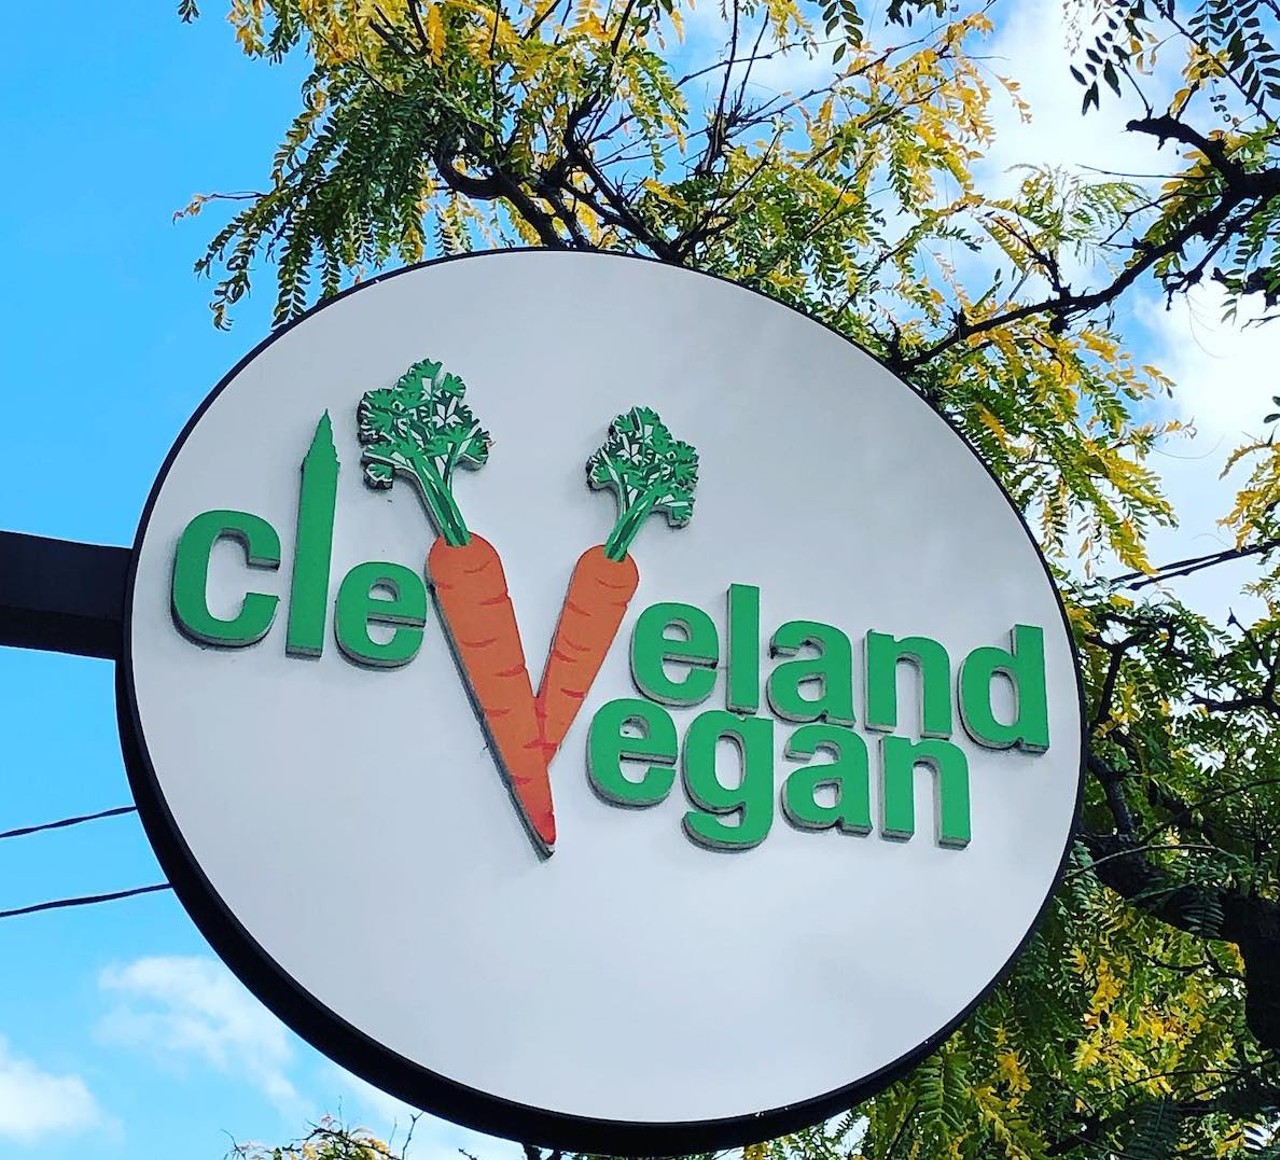  Cleveland Vegan
17112 Detroit Ave., Lakewood 
Cleveland Vegan has one of, if not the most extensive vegan menu in town. ‘S’more French Toast’, ‘Creamy Shiitake Benedict’ and the ‘Buffalo Cauliflower Dip’ are three items that really make our mouths water. The baked goods really delicious too.